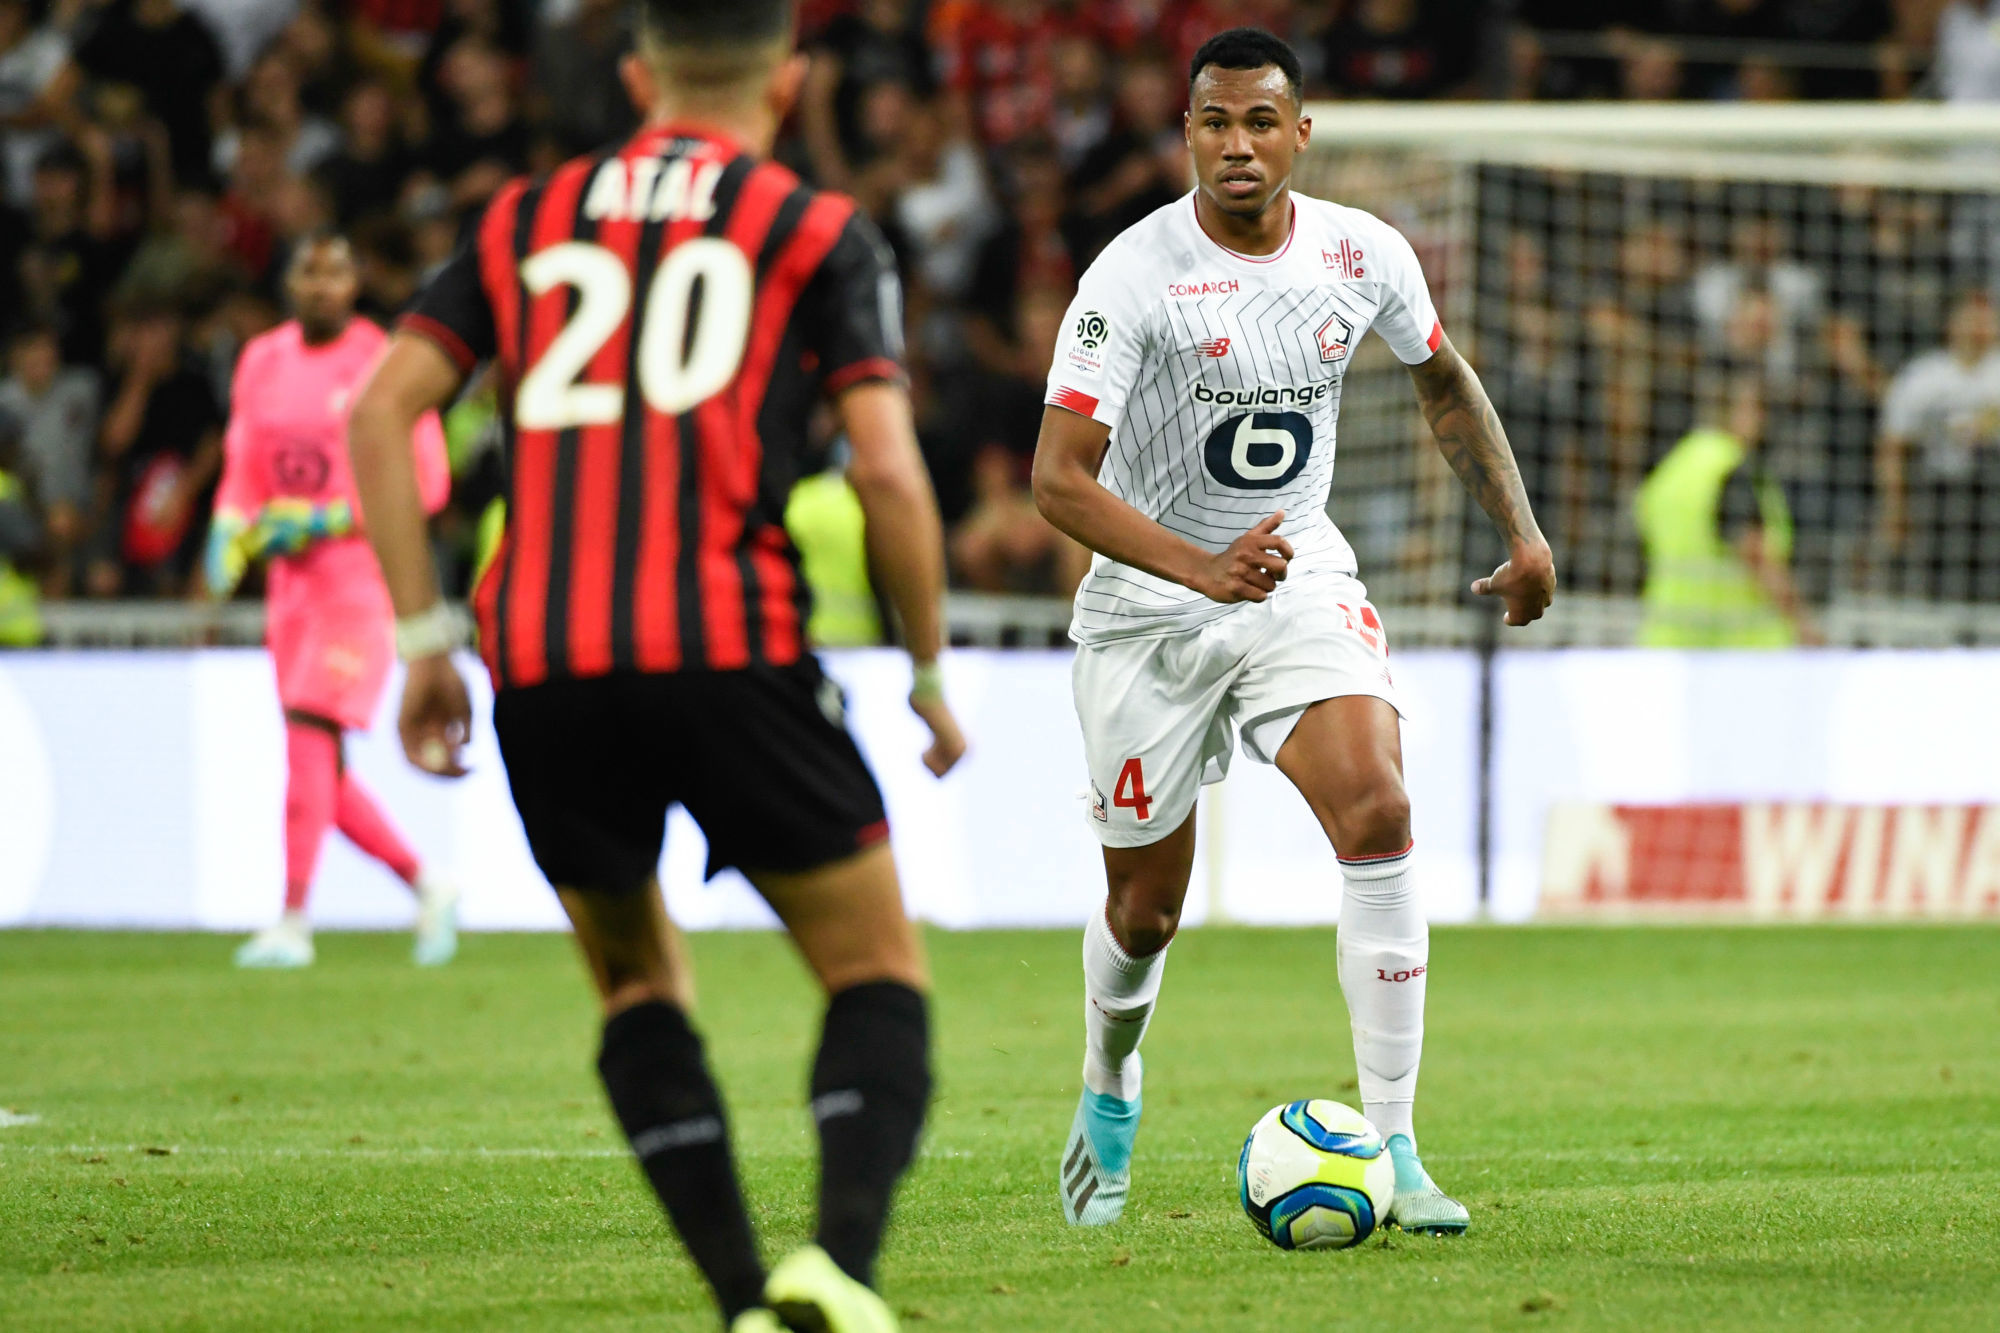 Gabriel DOS SANTOS of Lille during the Ligue 1 match between Nice and Lille on September 28, 2019 in Nice, France. (Photo by Agence Nice Presse/Icon Sport) - Gabriel DOS SANTOS - Allianz Riviera - Nice (France)